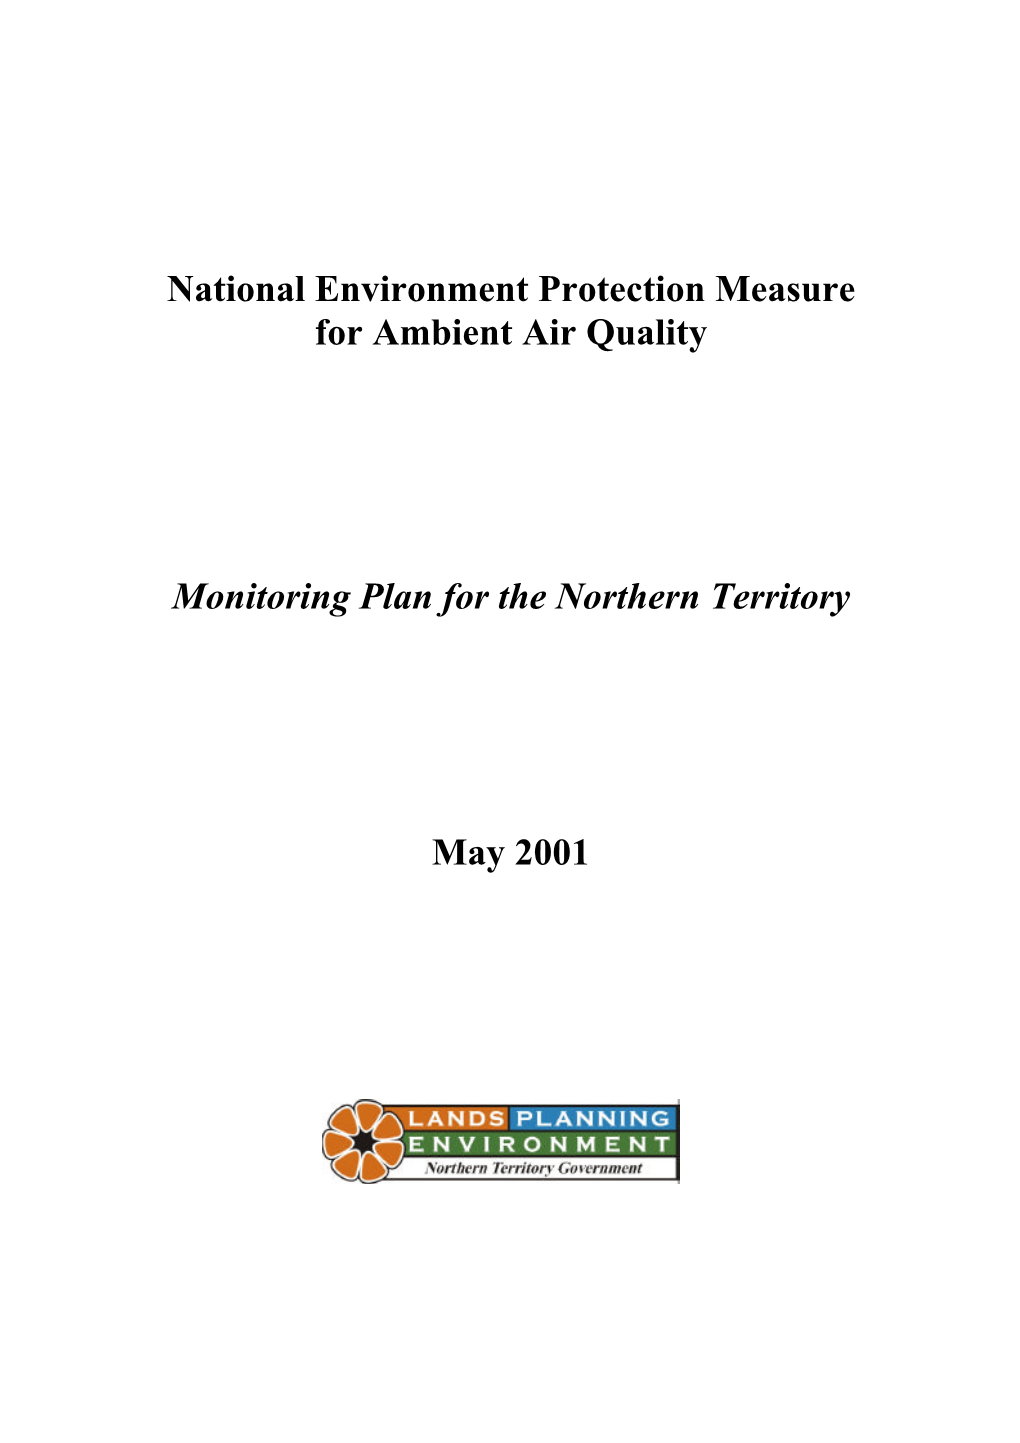 National Environment Protection Measure for Ambient Air Quality Monitoring Plan for the Northern Territory May 2001